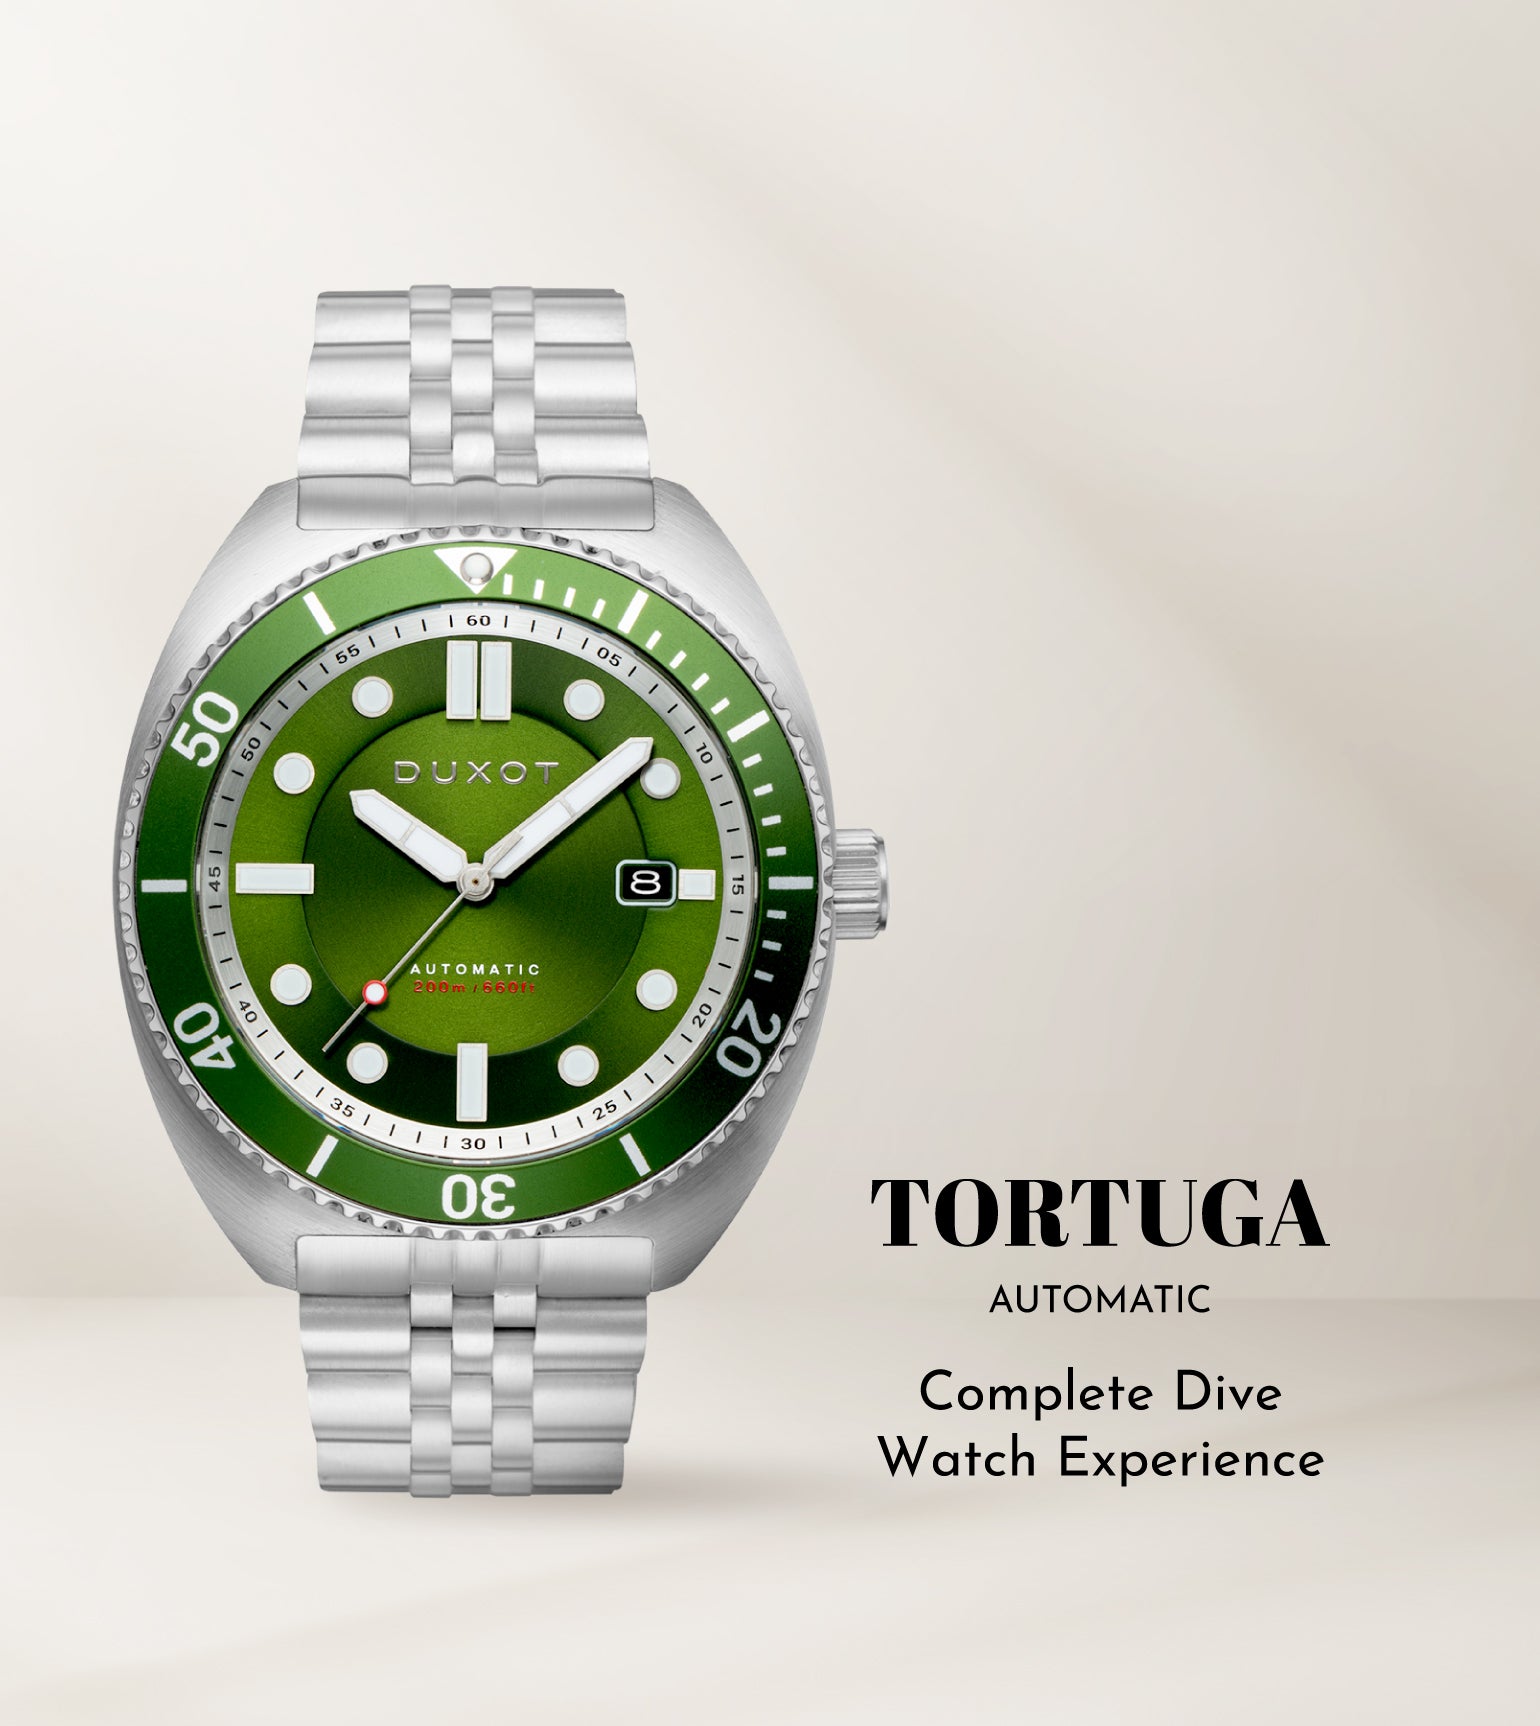 TORTUGA AUTOMATIC – Duxot Watches